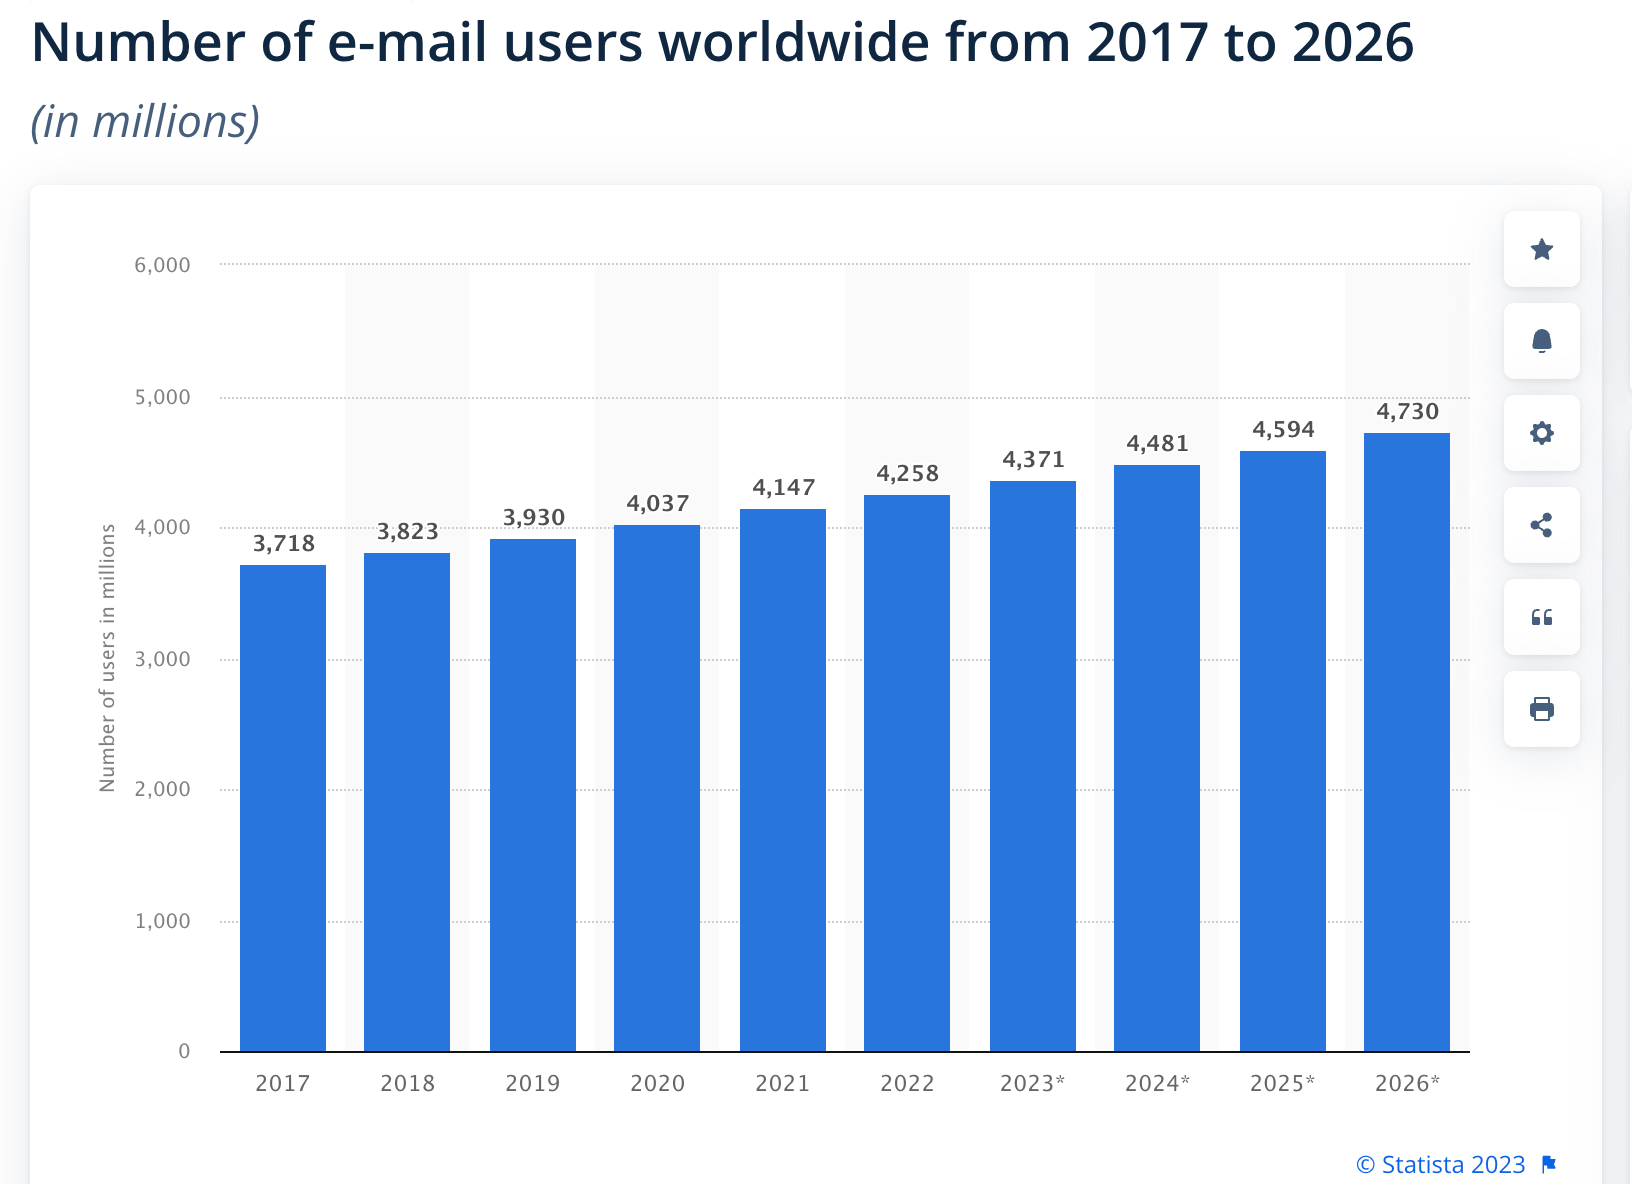 Number of email users